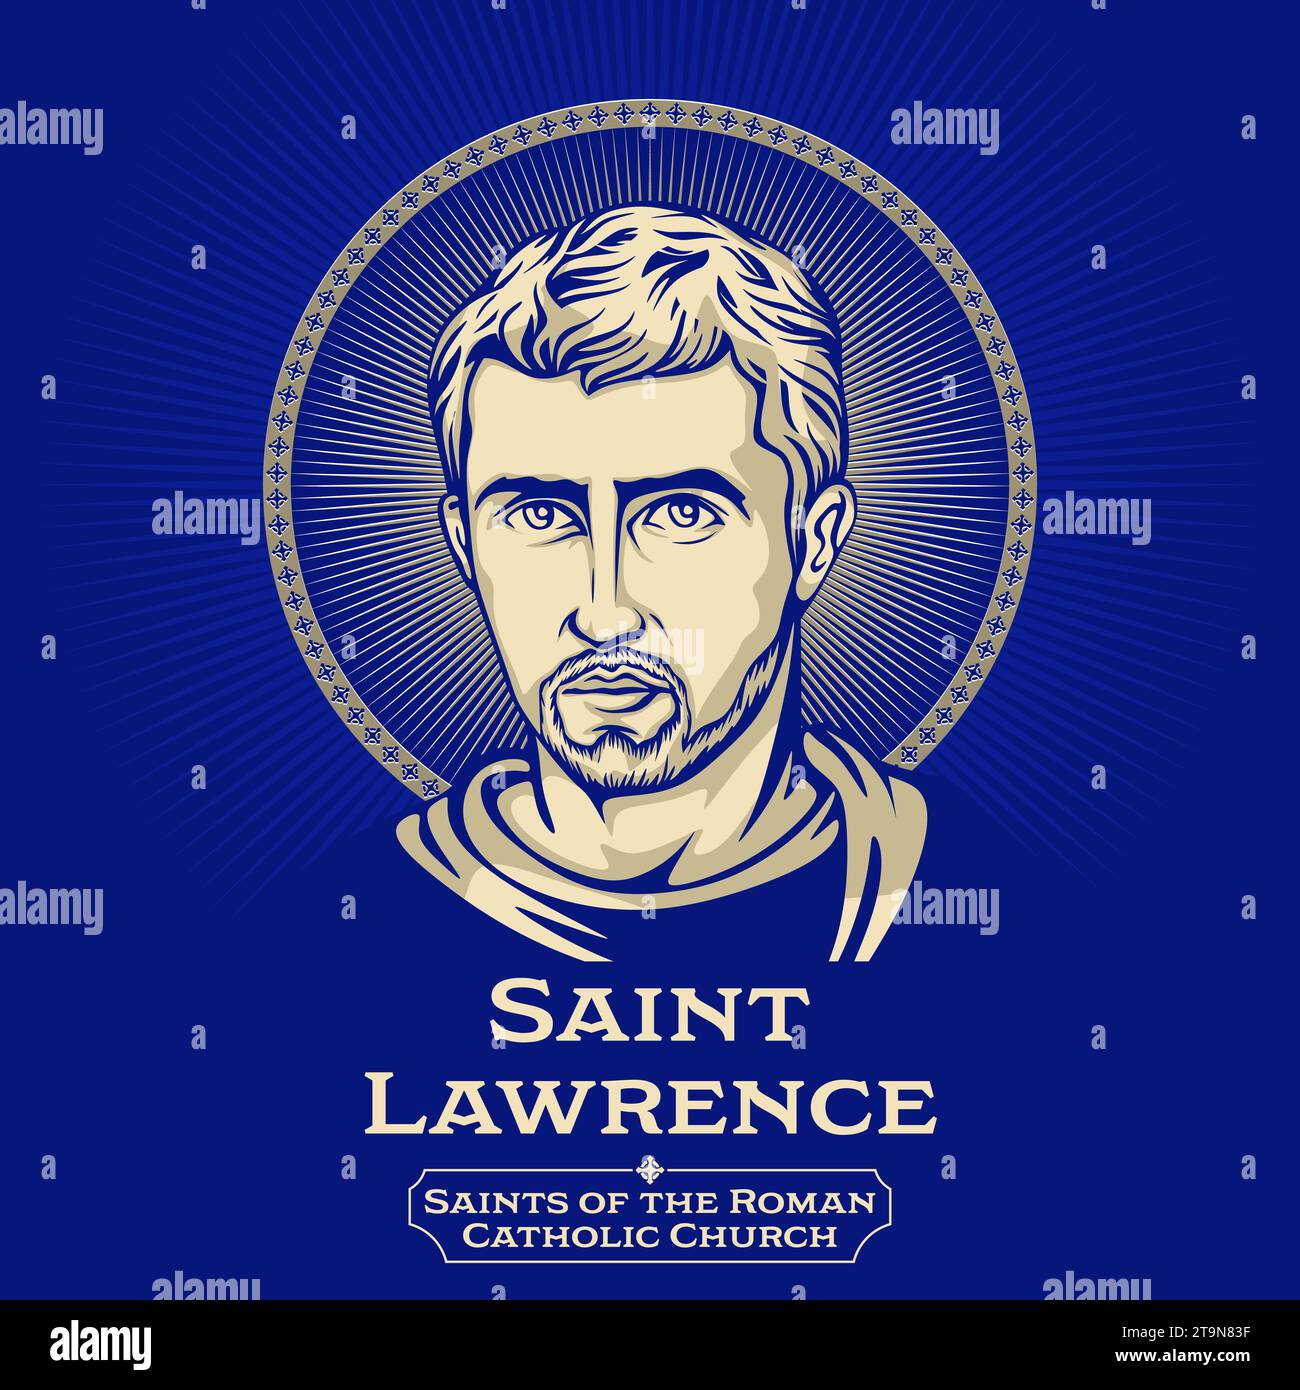 Catholic Saints. Saint Lawrence (225-258) was one of the seven deacons of the city of Rome under Pope Sixtus II who were martyred in the persecution Stock Vector